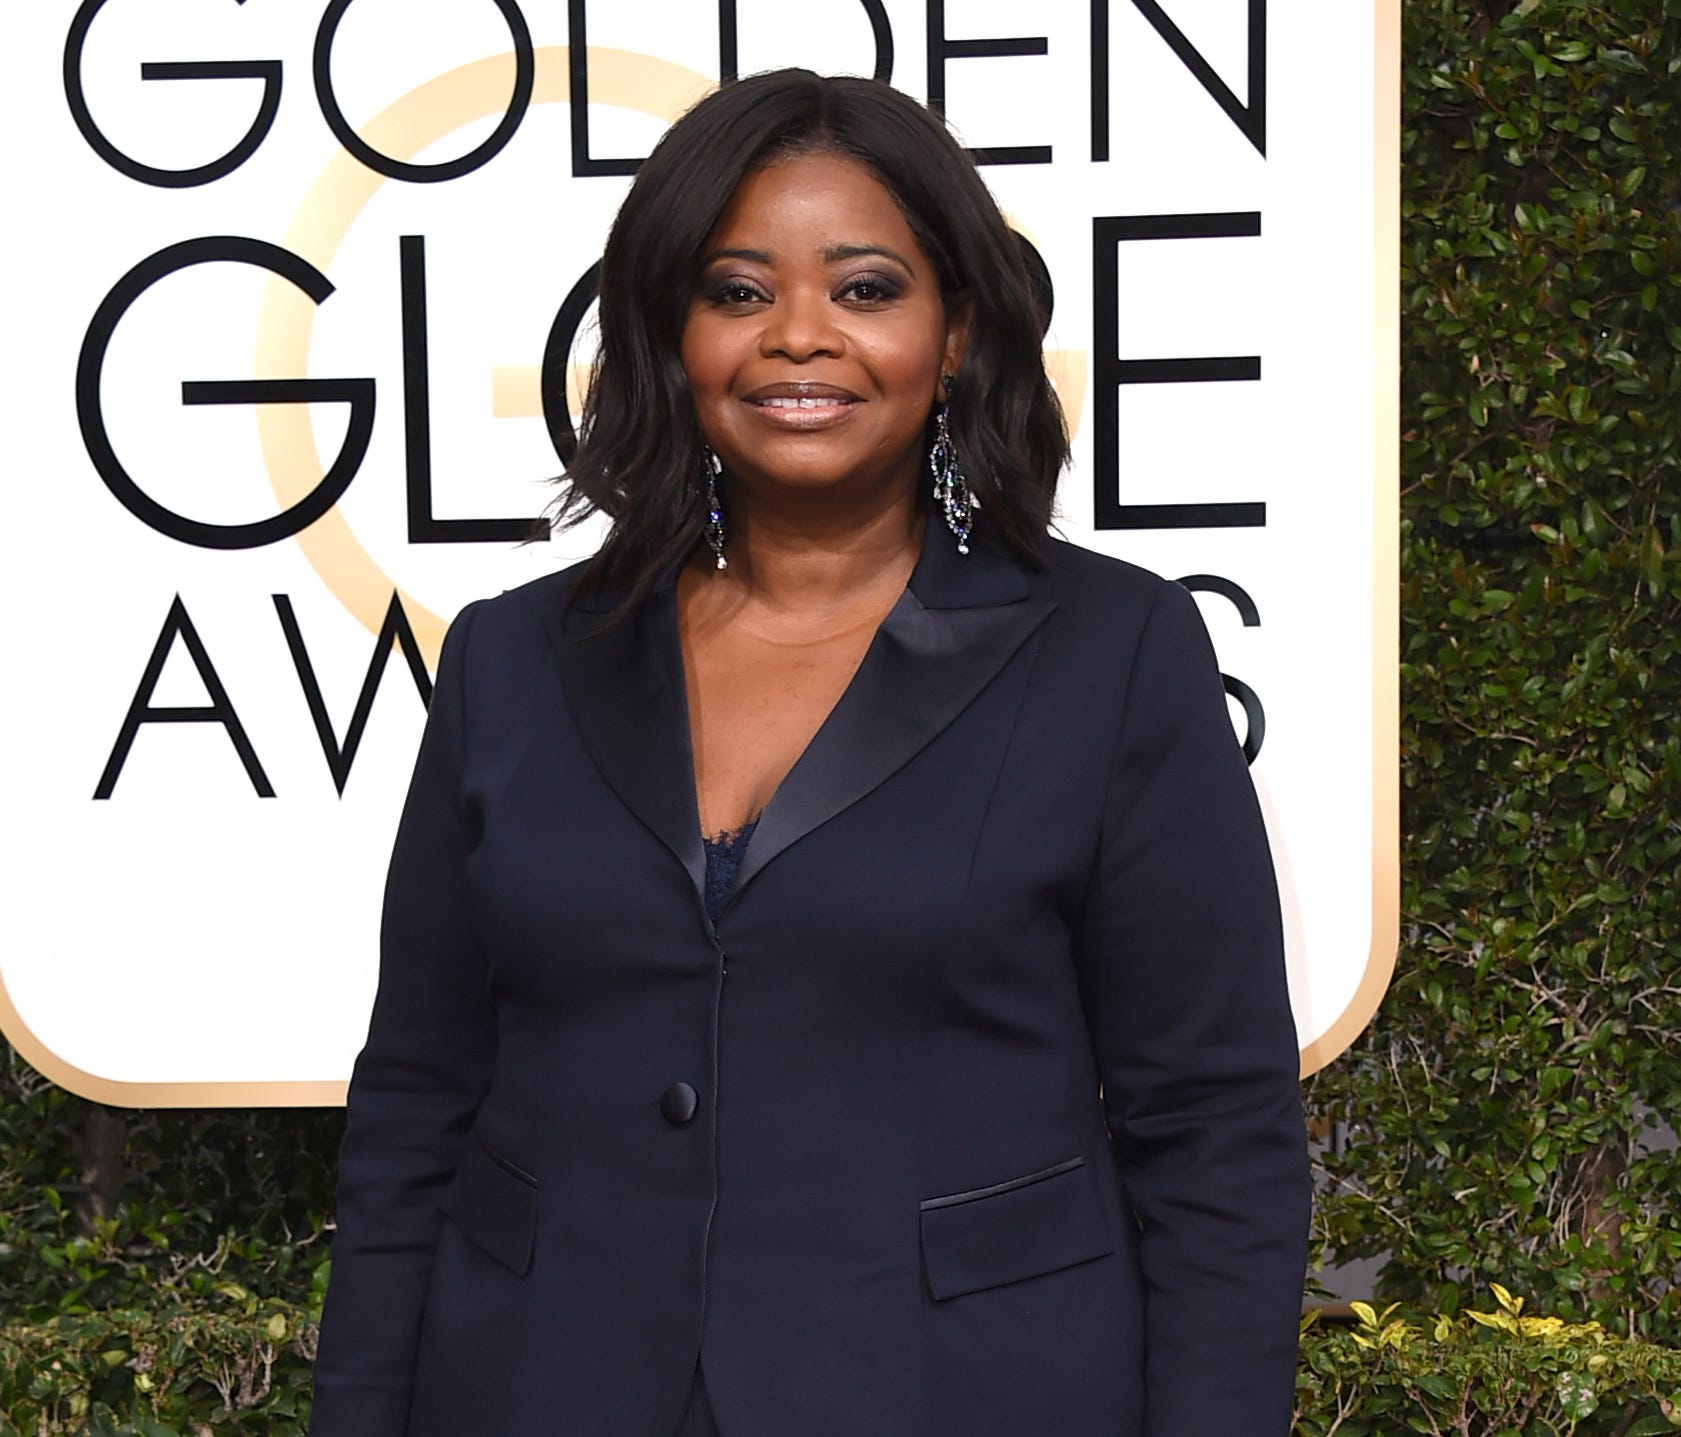 Octavia Spencer arrives at the 74th annual Golden Globe Awards at the Beverly Hilton.